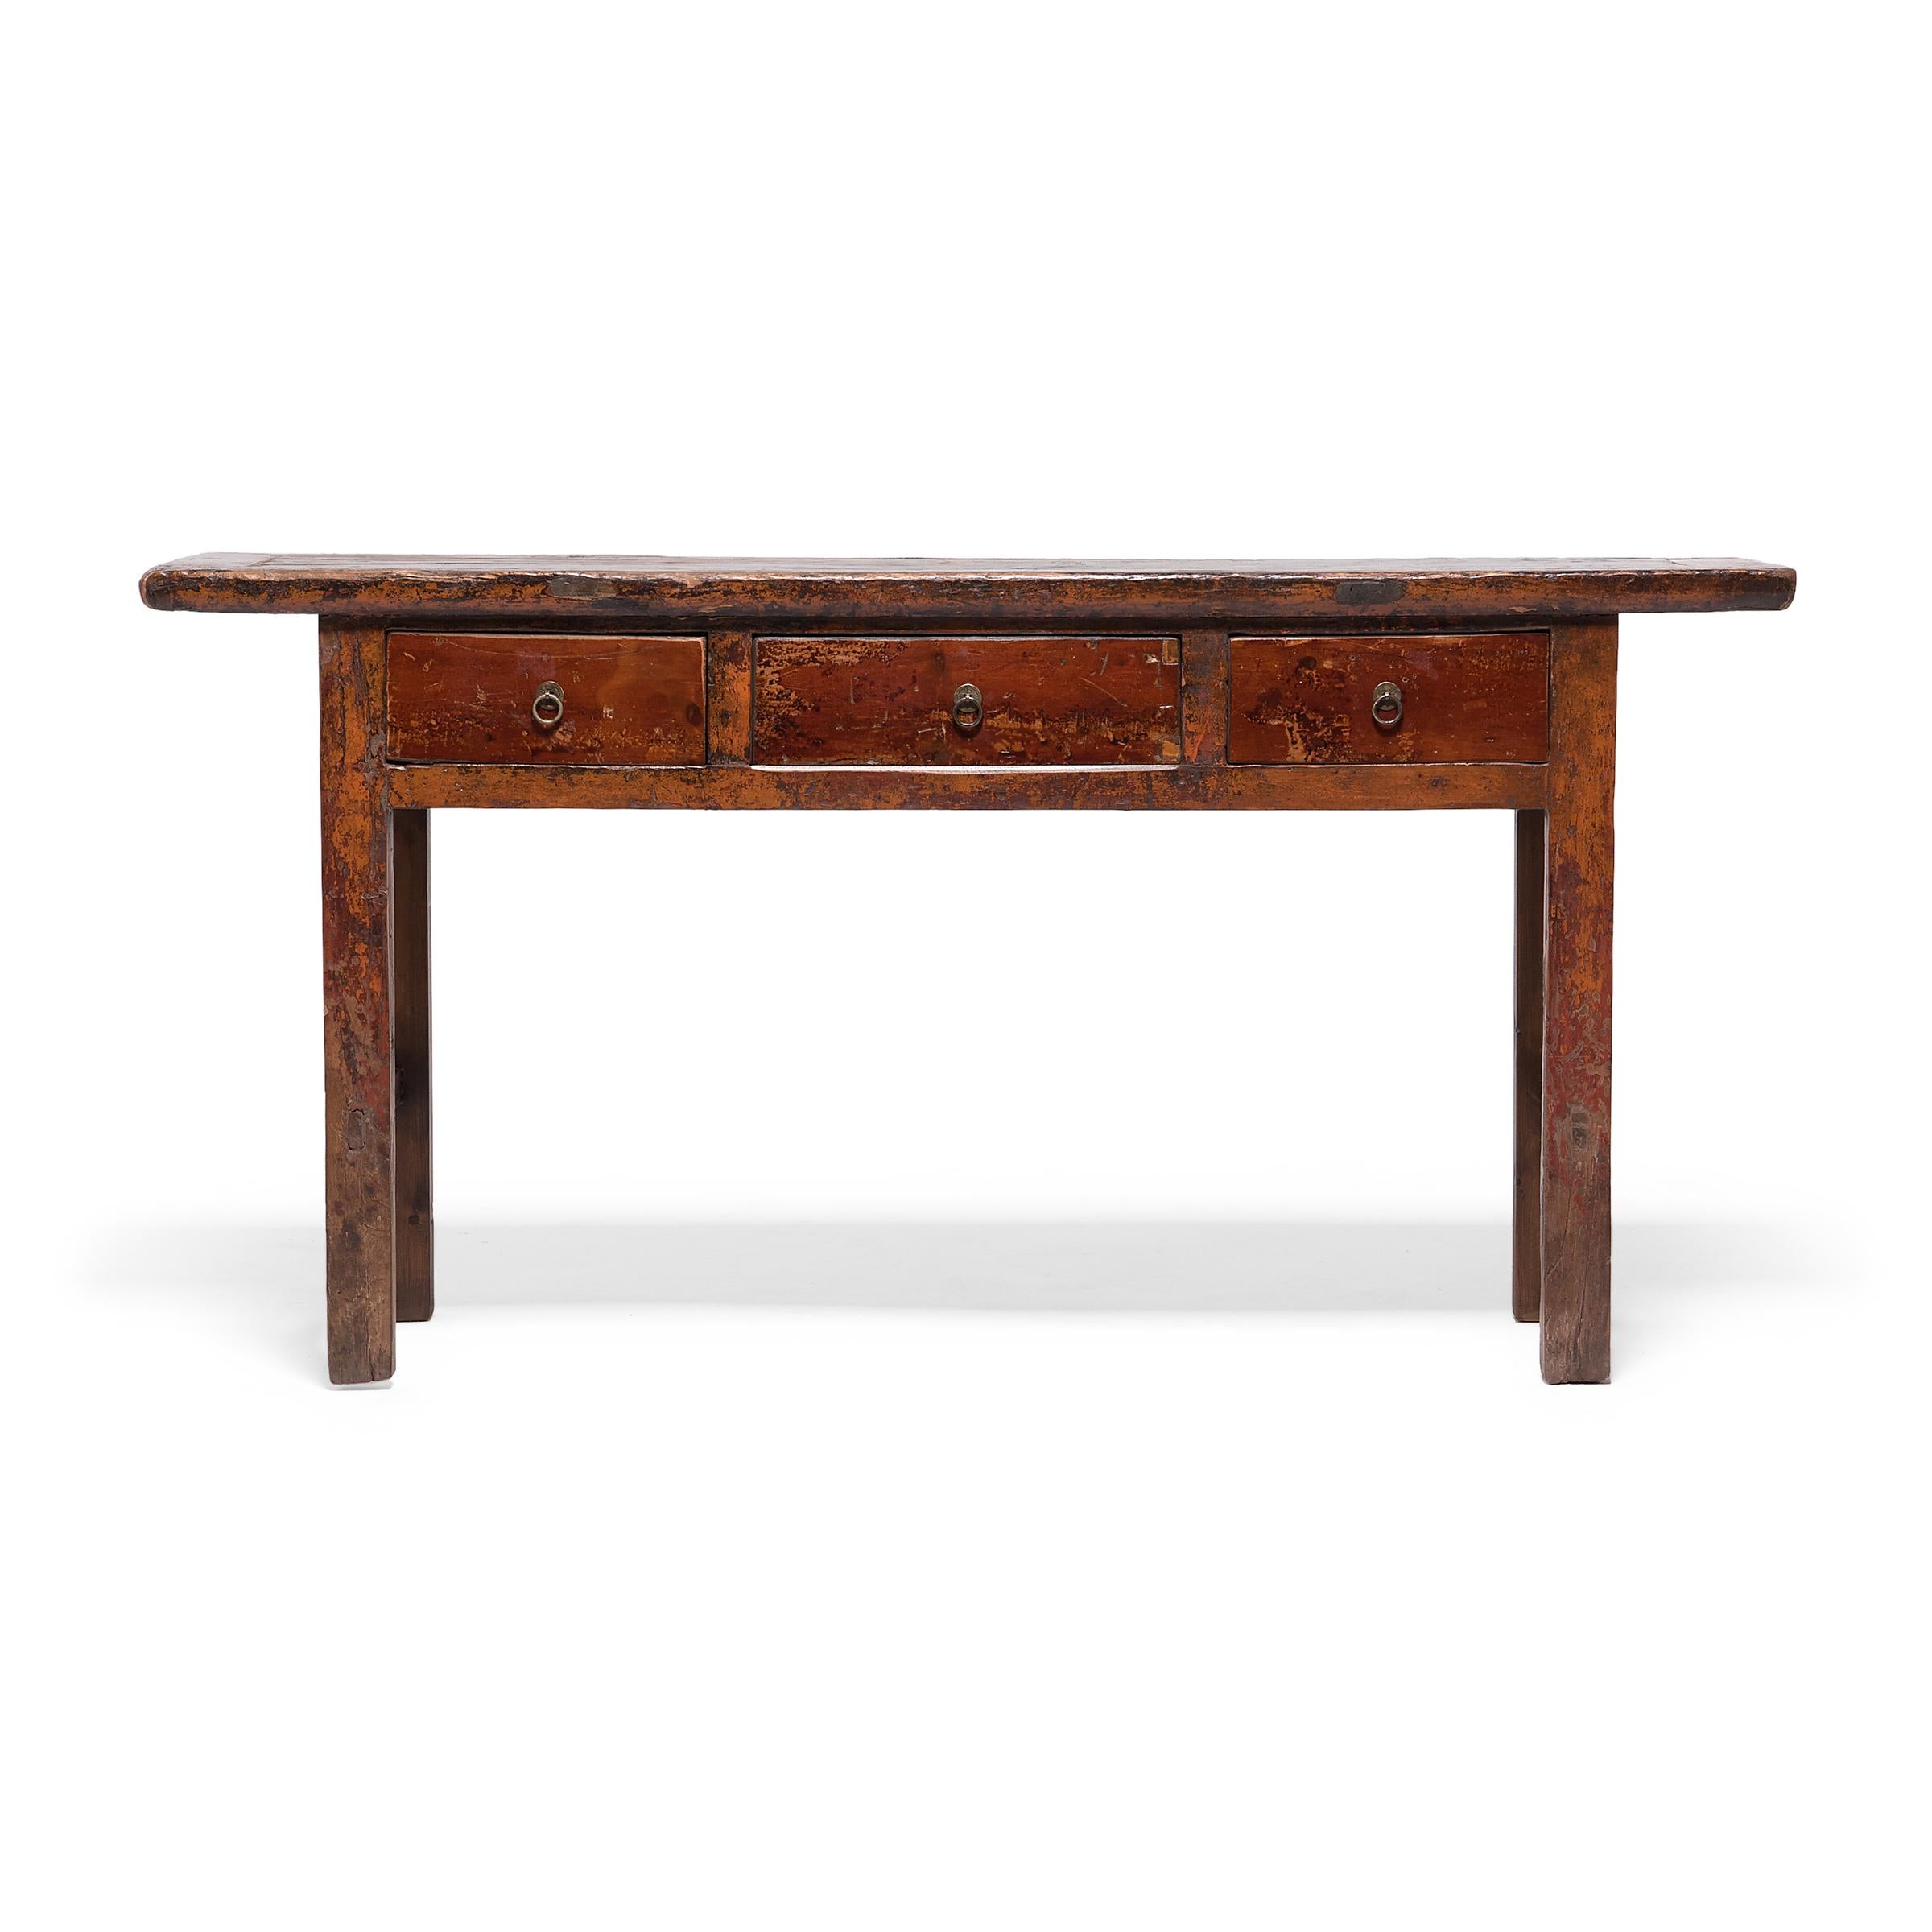 Dated to the early 20th-century, this three-drawer table began its life in China's Gansu province as a versatile surface in a provincial home, used for general household storage and as a domestic altar for ancestor worship. Crafted of poplar, the